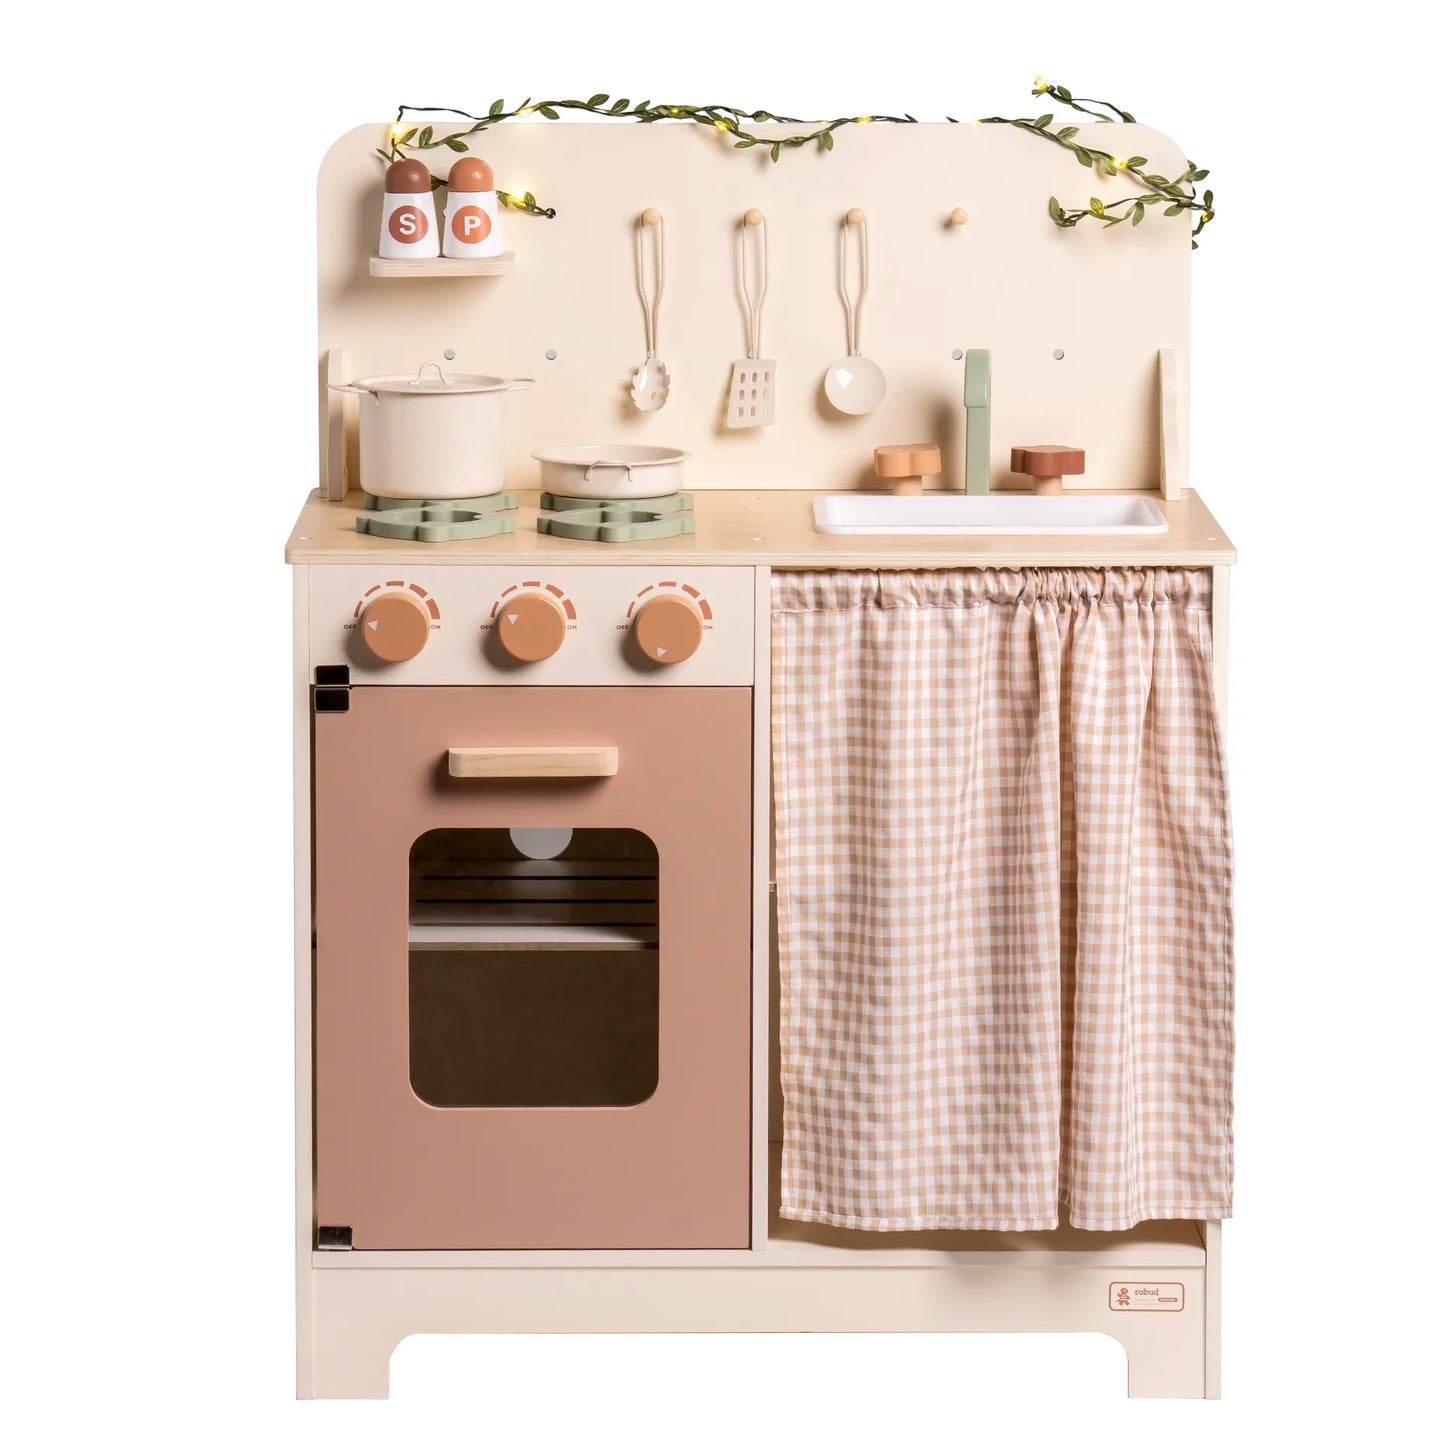 Kids Play Kitchen Set - Rustic Wooden Pretend Play Kitchen with Leaf Light String, Apron, and Groves, for Toddlers 3+  Wooden Play Kitchen